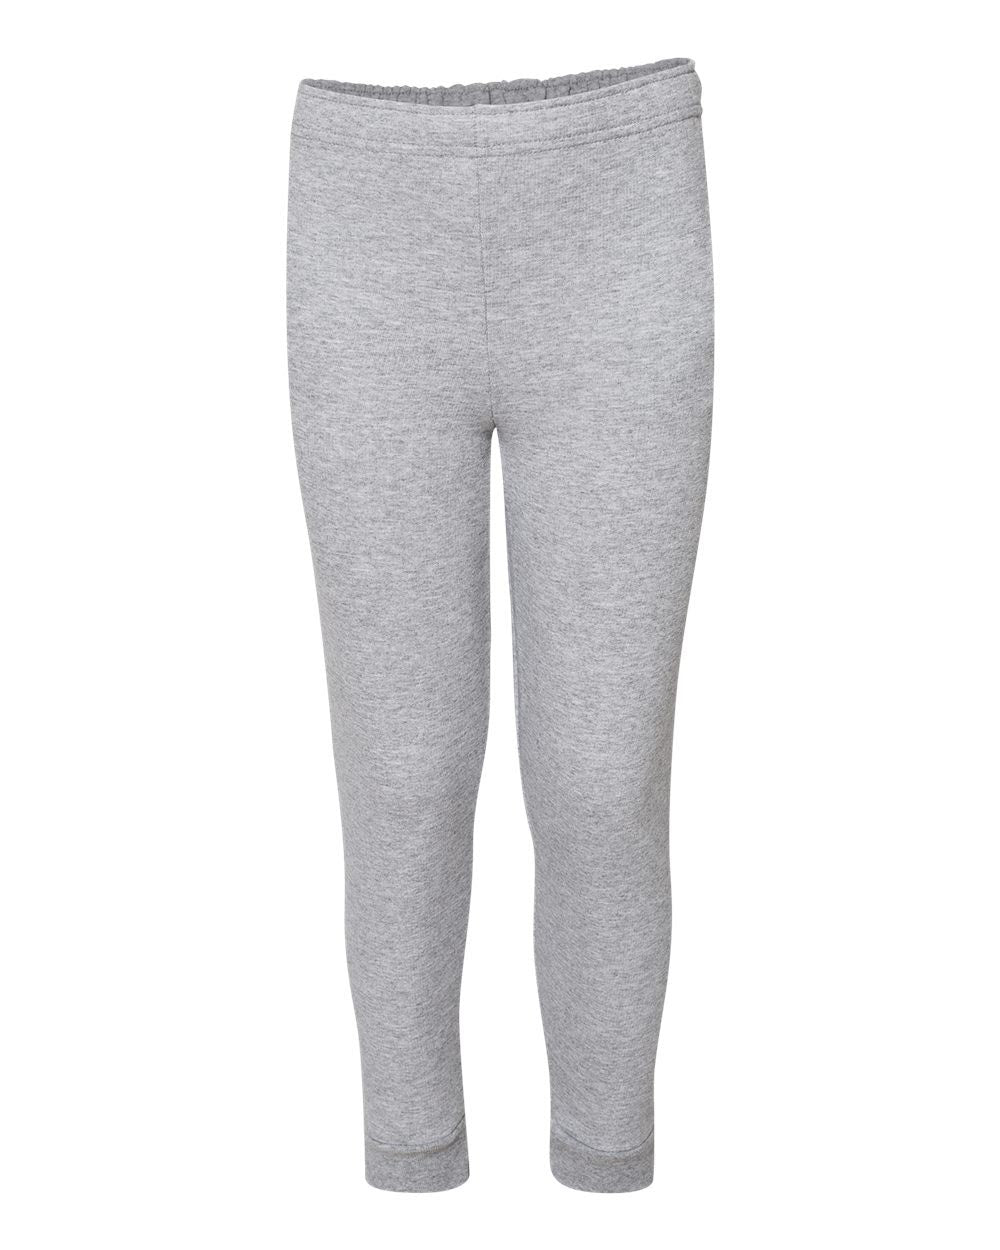 YOUTH FLEECE SWEATPANTS <br />jerzees <br/>classic fit - humanKIND